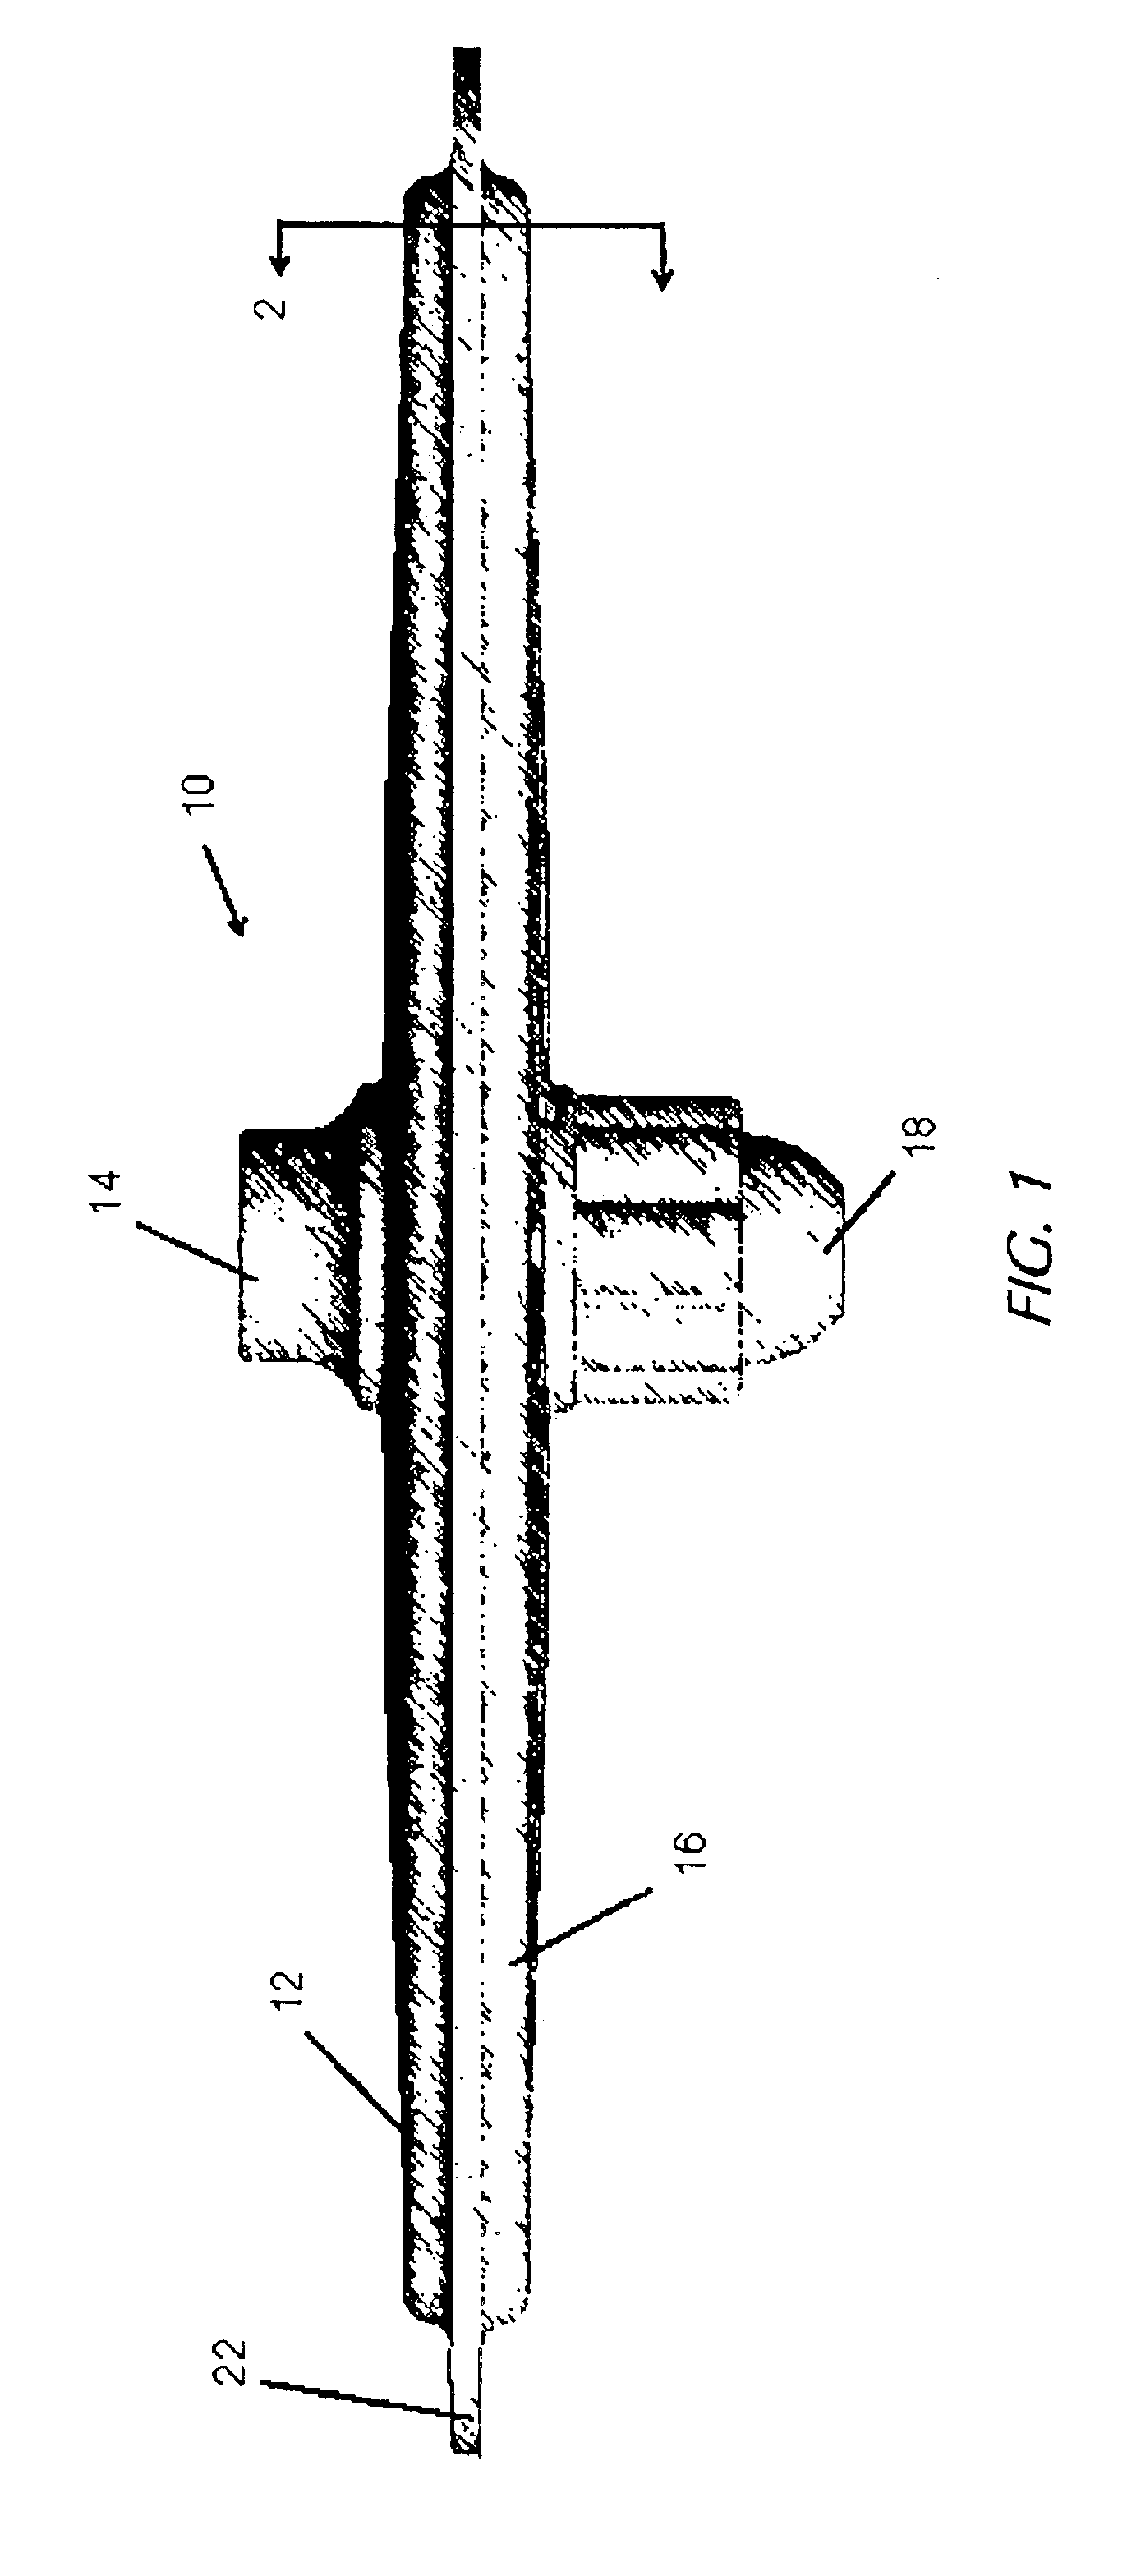 Microporous filter media, filtration systems containing same, and methods of making and using